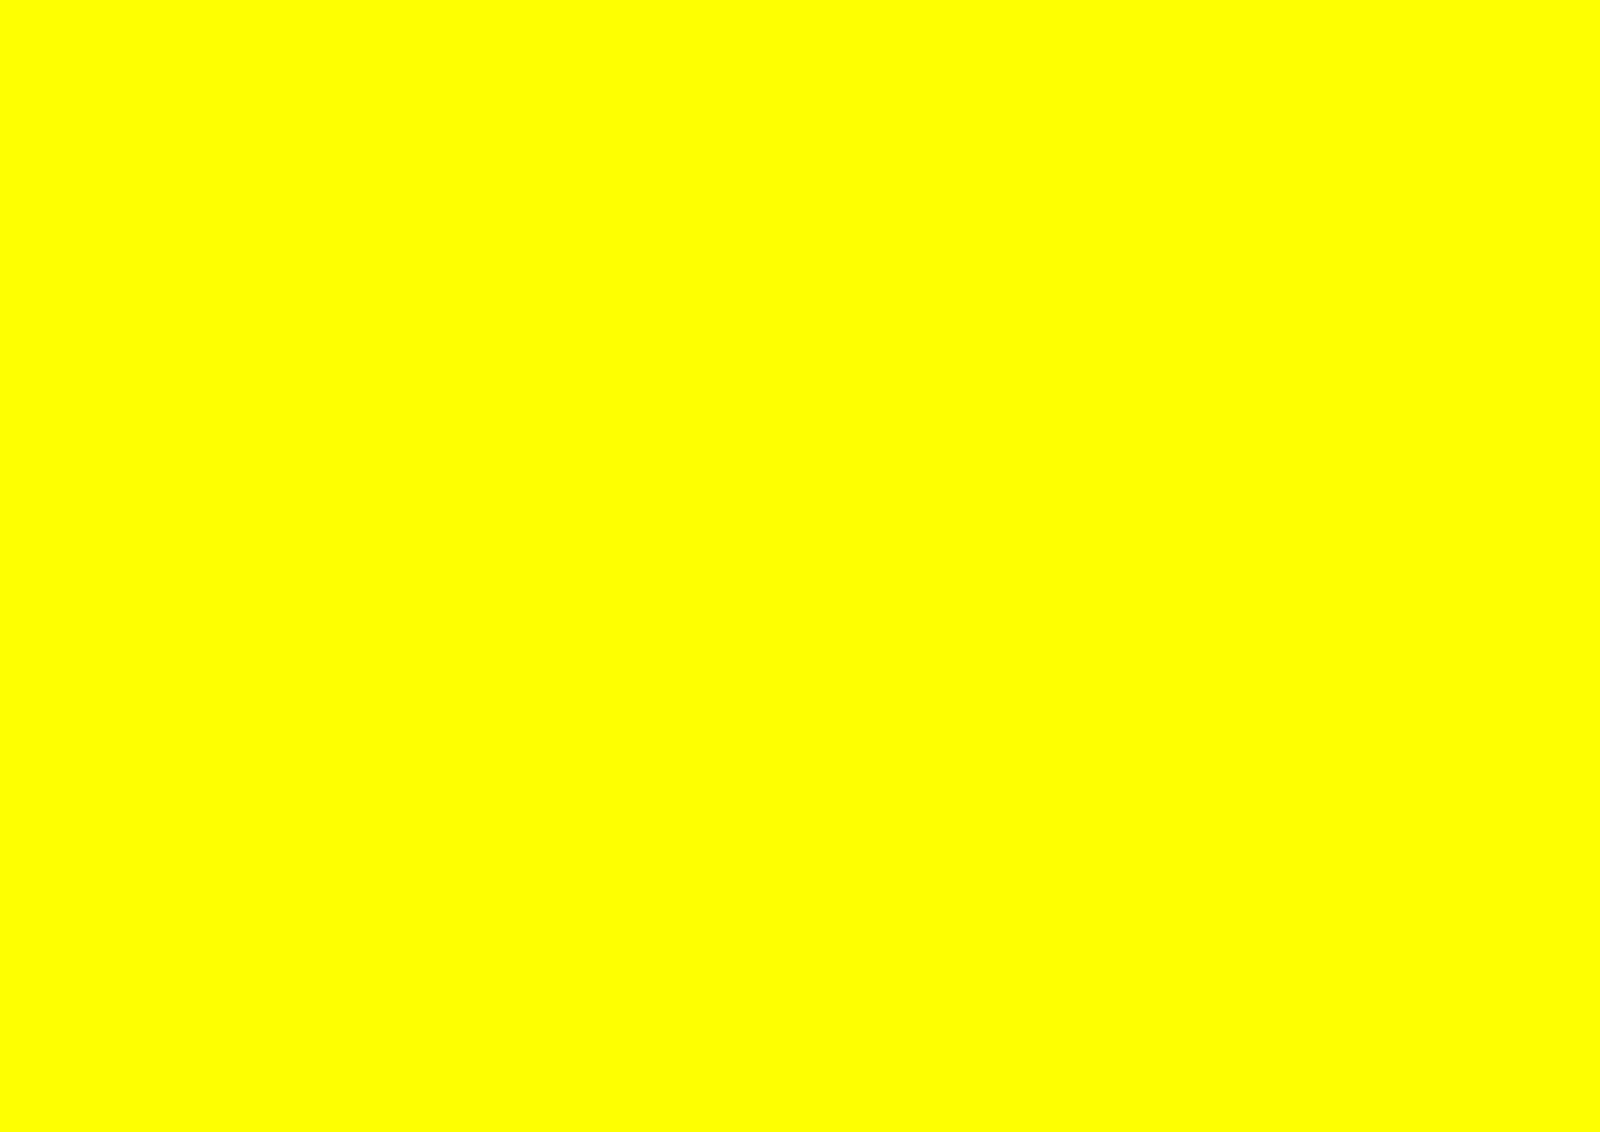 Neon Colors Yellow Imgkid Com The Image Kid Has It Coloring Wallpapers Download Free Images Wallpaper [coloring654.blogspot.com]